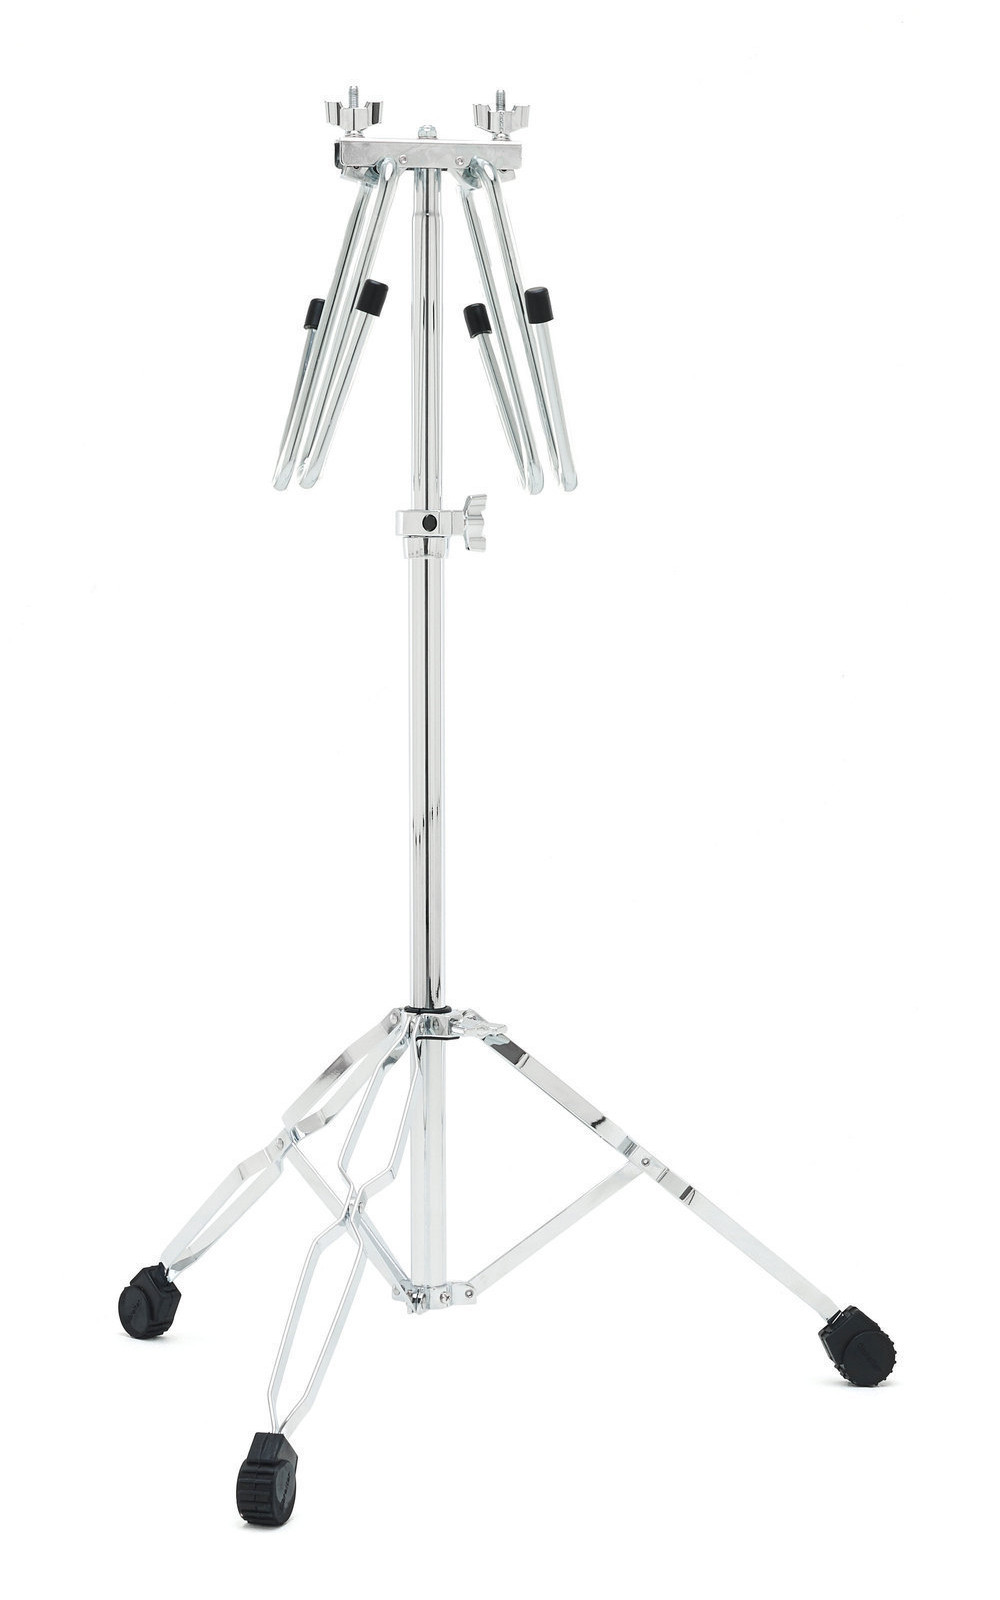 GIBRALTAR 7614 - ORCHESTRAL CYMBAL STAND 